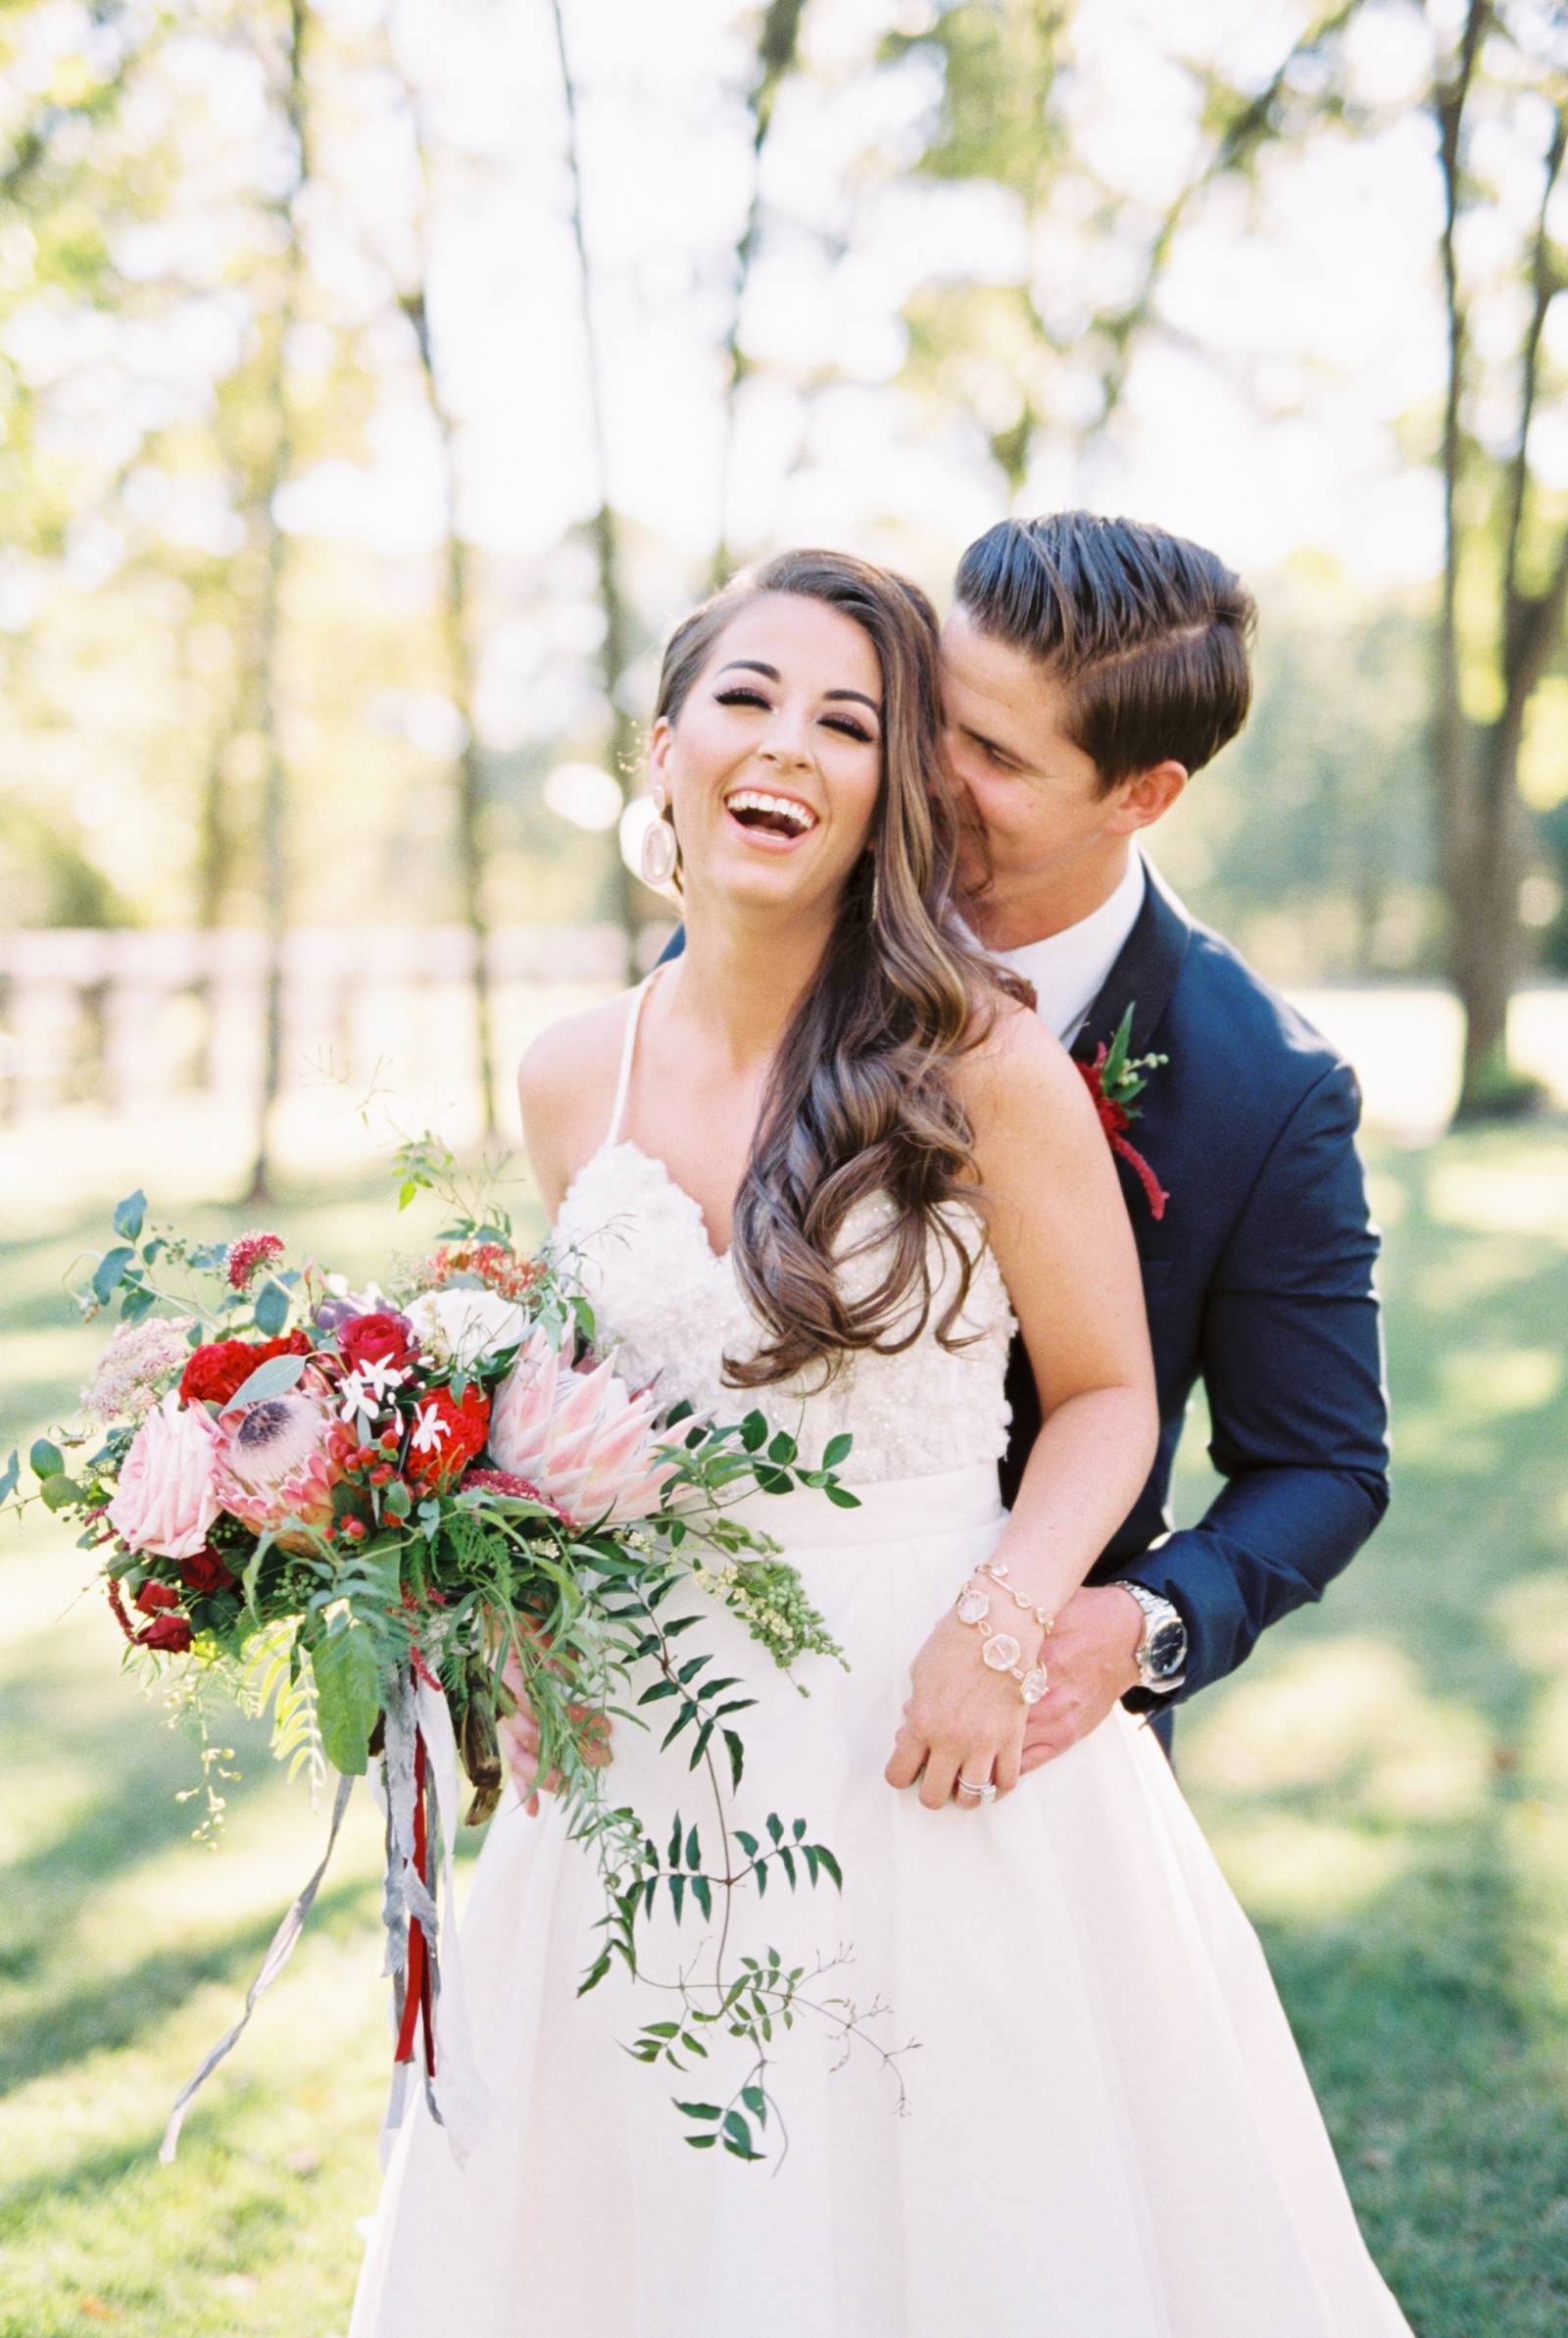 Winter Wedding in Texas with pops of pomegranate red | Texas Real Weddings